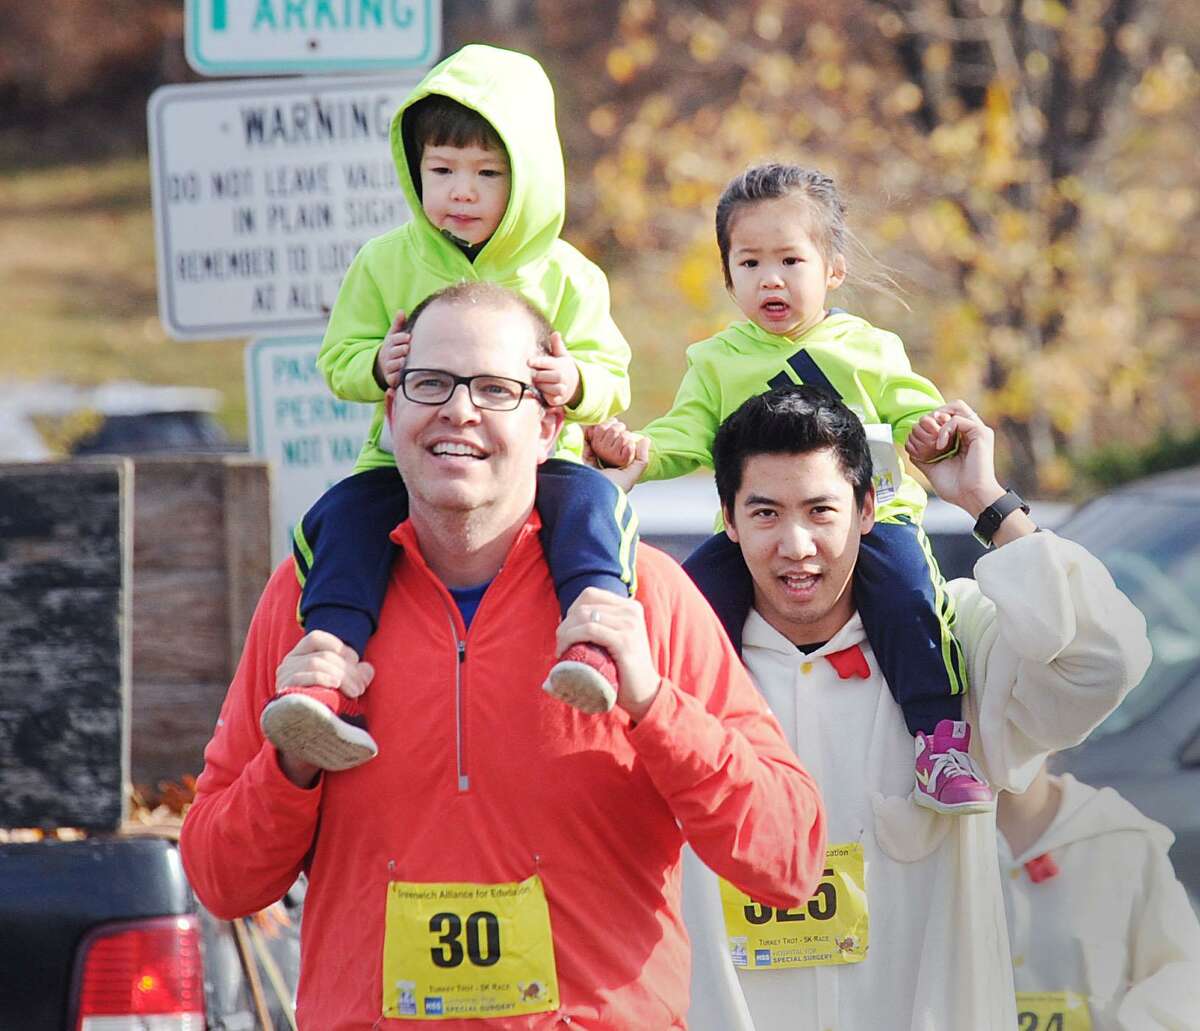 At right, Greenwich resident Jon Liu (325) might have come in last during the 1-mile fun run and walk but that was only because, like others, he carried his child, Josslyn, 2, on his shoulders for most of the race during the Greenwich Alliance for Education's annual Turkey Trot starting at the Arch Street Teen Center in Greenwich, Conn., Saturday morning, Nov.26, 2016. Race official Mickey Yardis said over1,000 runners participated in the fund-raising benefit race. All proceeds from the race go to foster the Alliance's educational success programs for the Greenwich Public Schools.